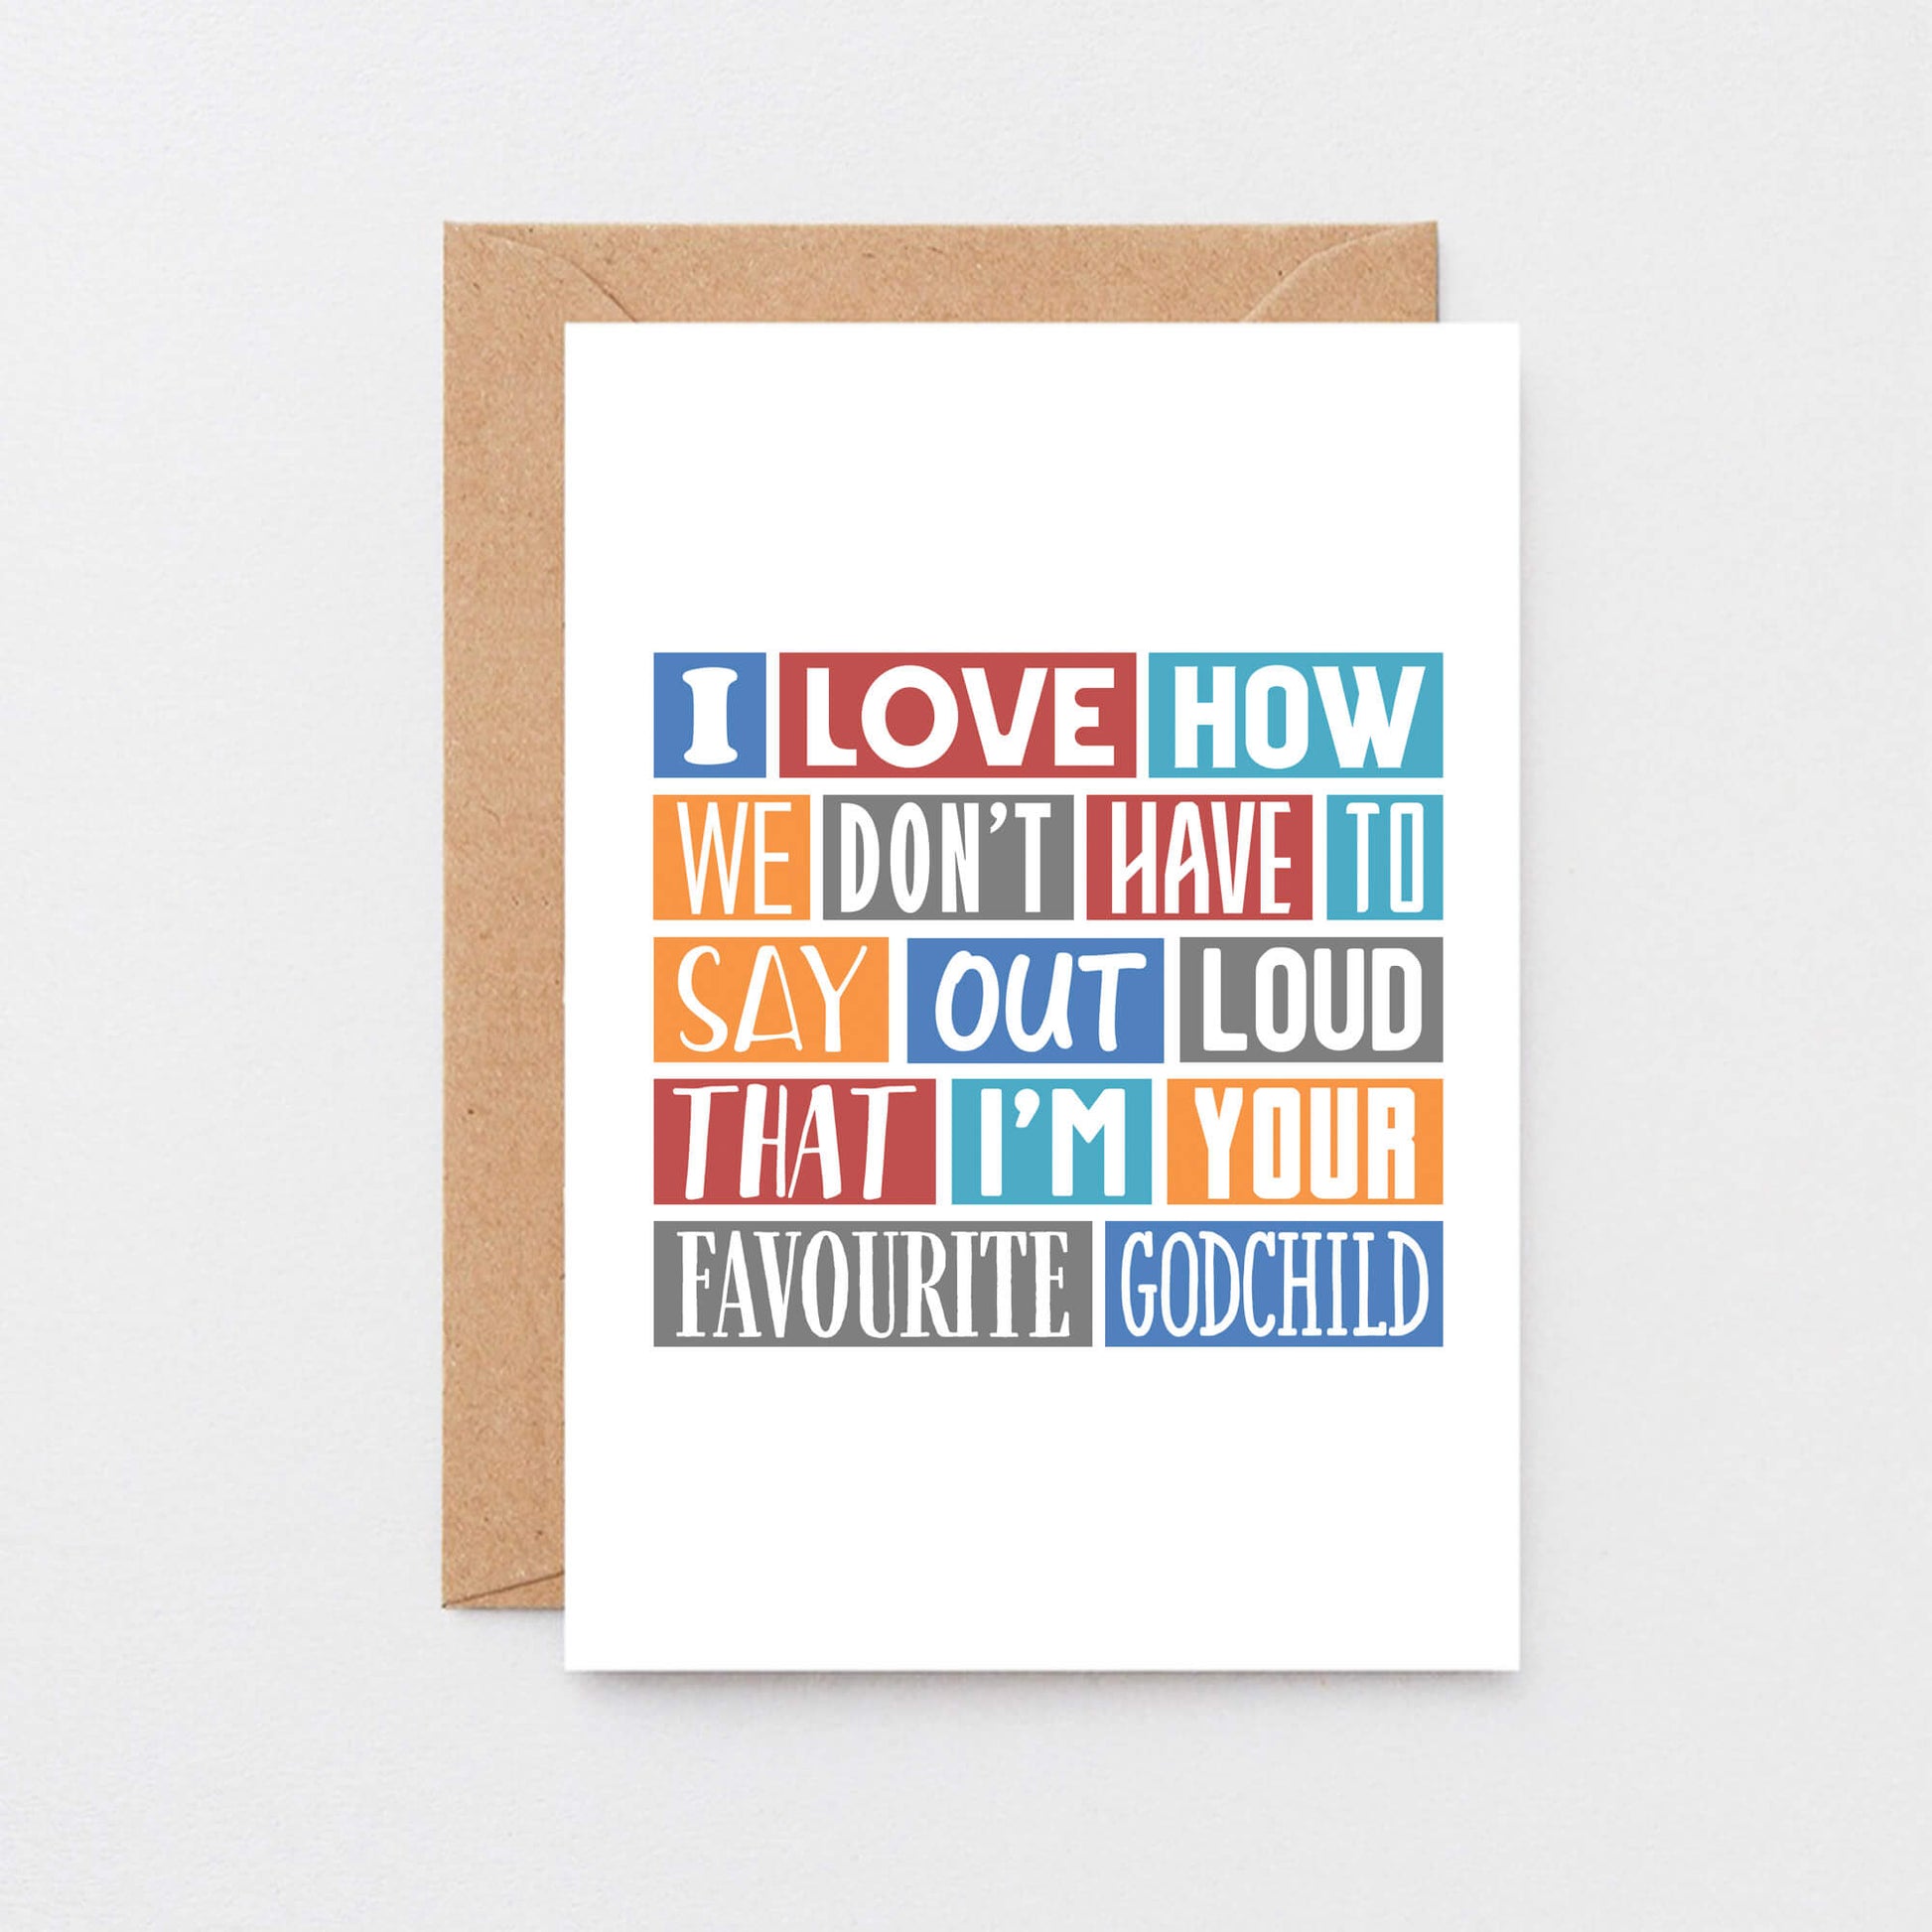 Godmother Birthday Card by SixElevenCreations. Reads I love how we don't have to say out loud that I'm your favourite godchild. Product Code SE0172A6